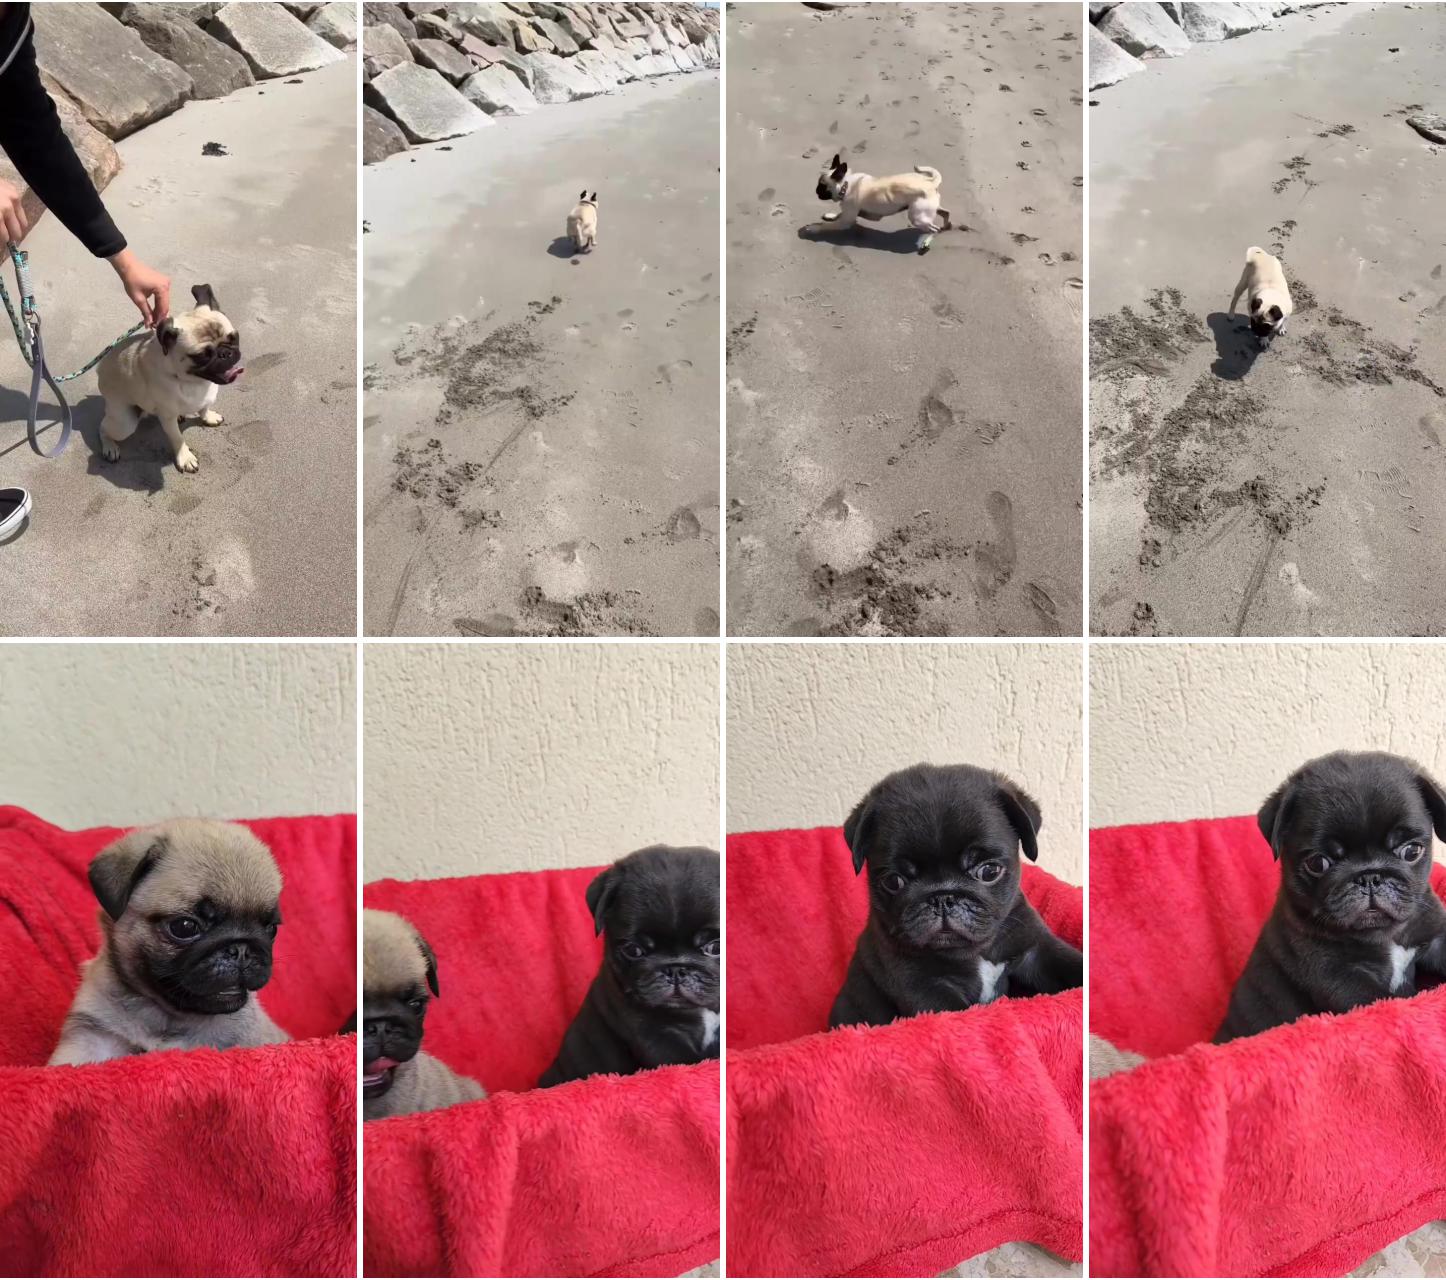 Laugh-out-loud pug puppy zoomies: lightning-fast dash of hilarious energy unleashed ; adorable pug puppies playing with mom in their dog bed 